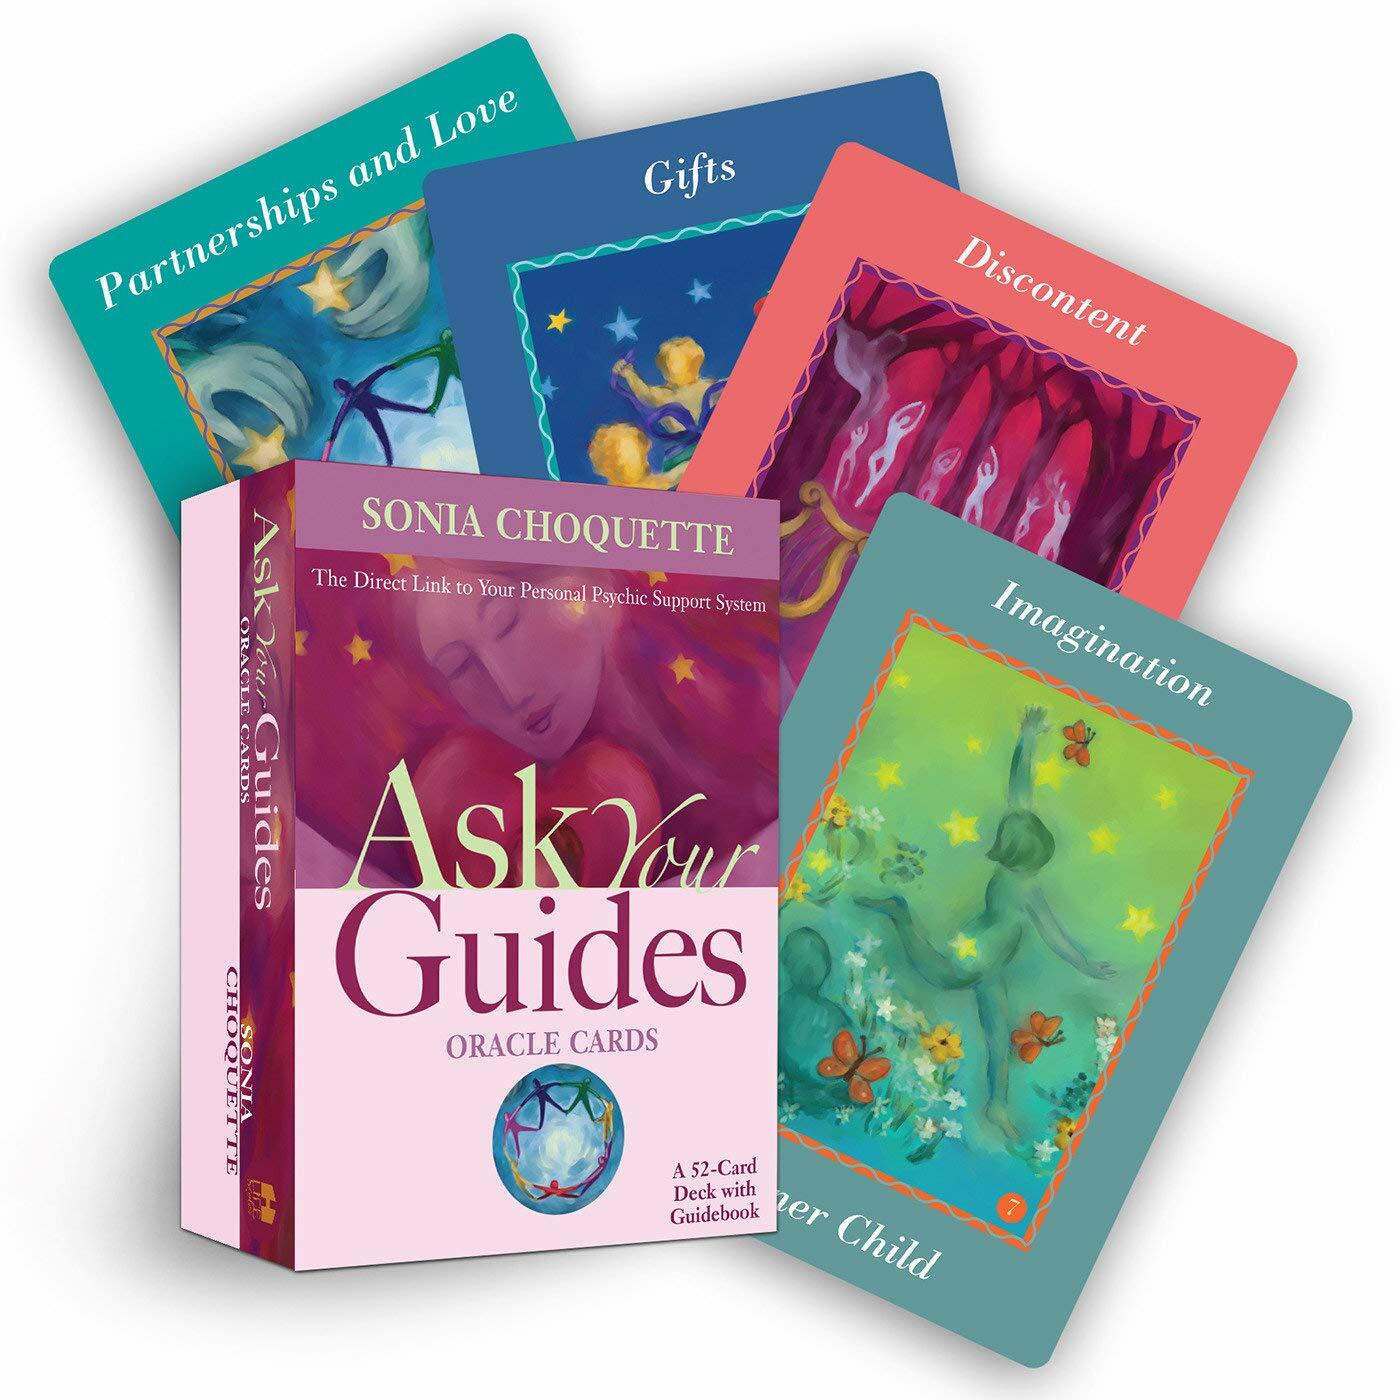 Ask Your Guides Oracle Cards (Other)